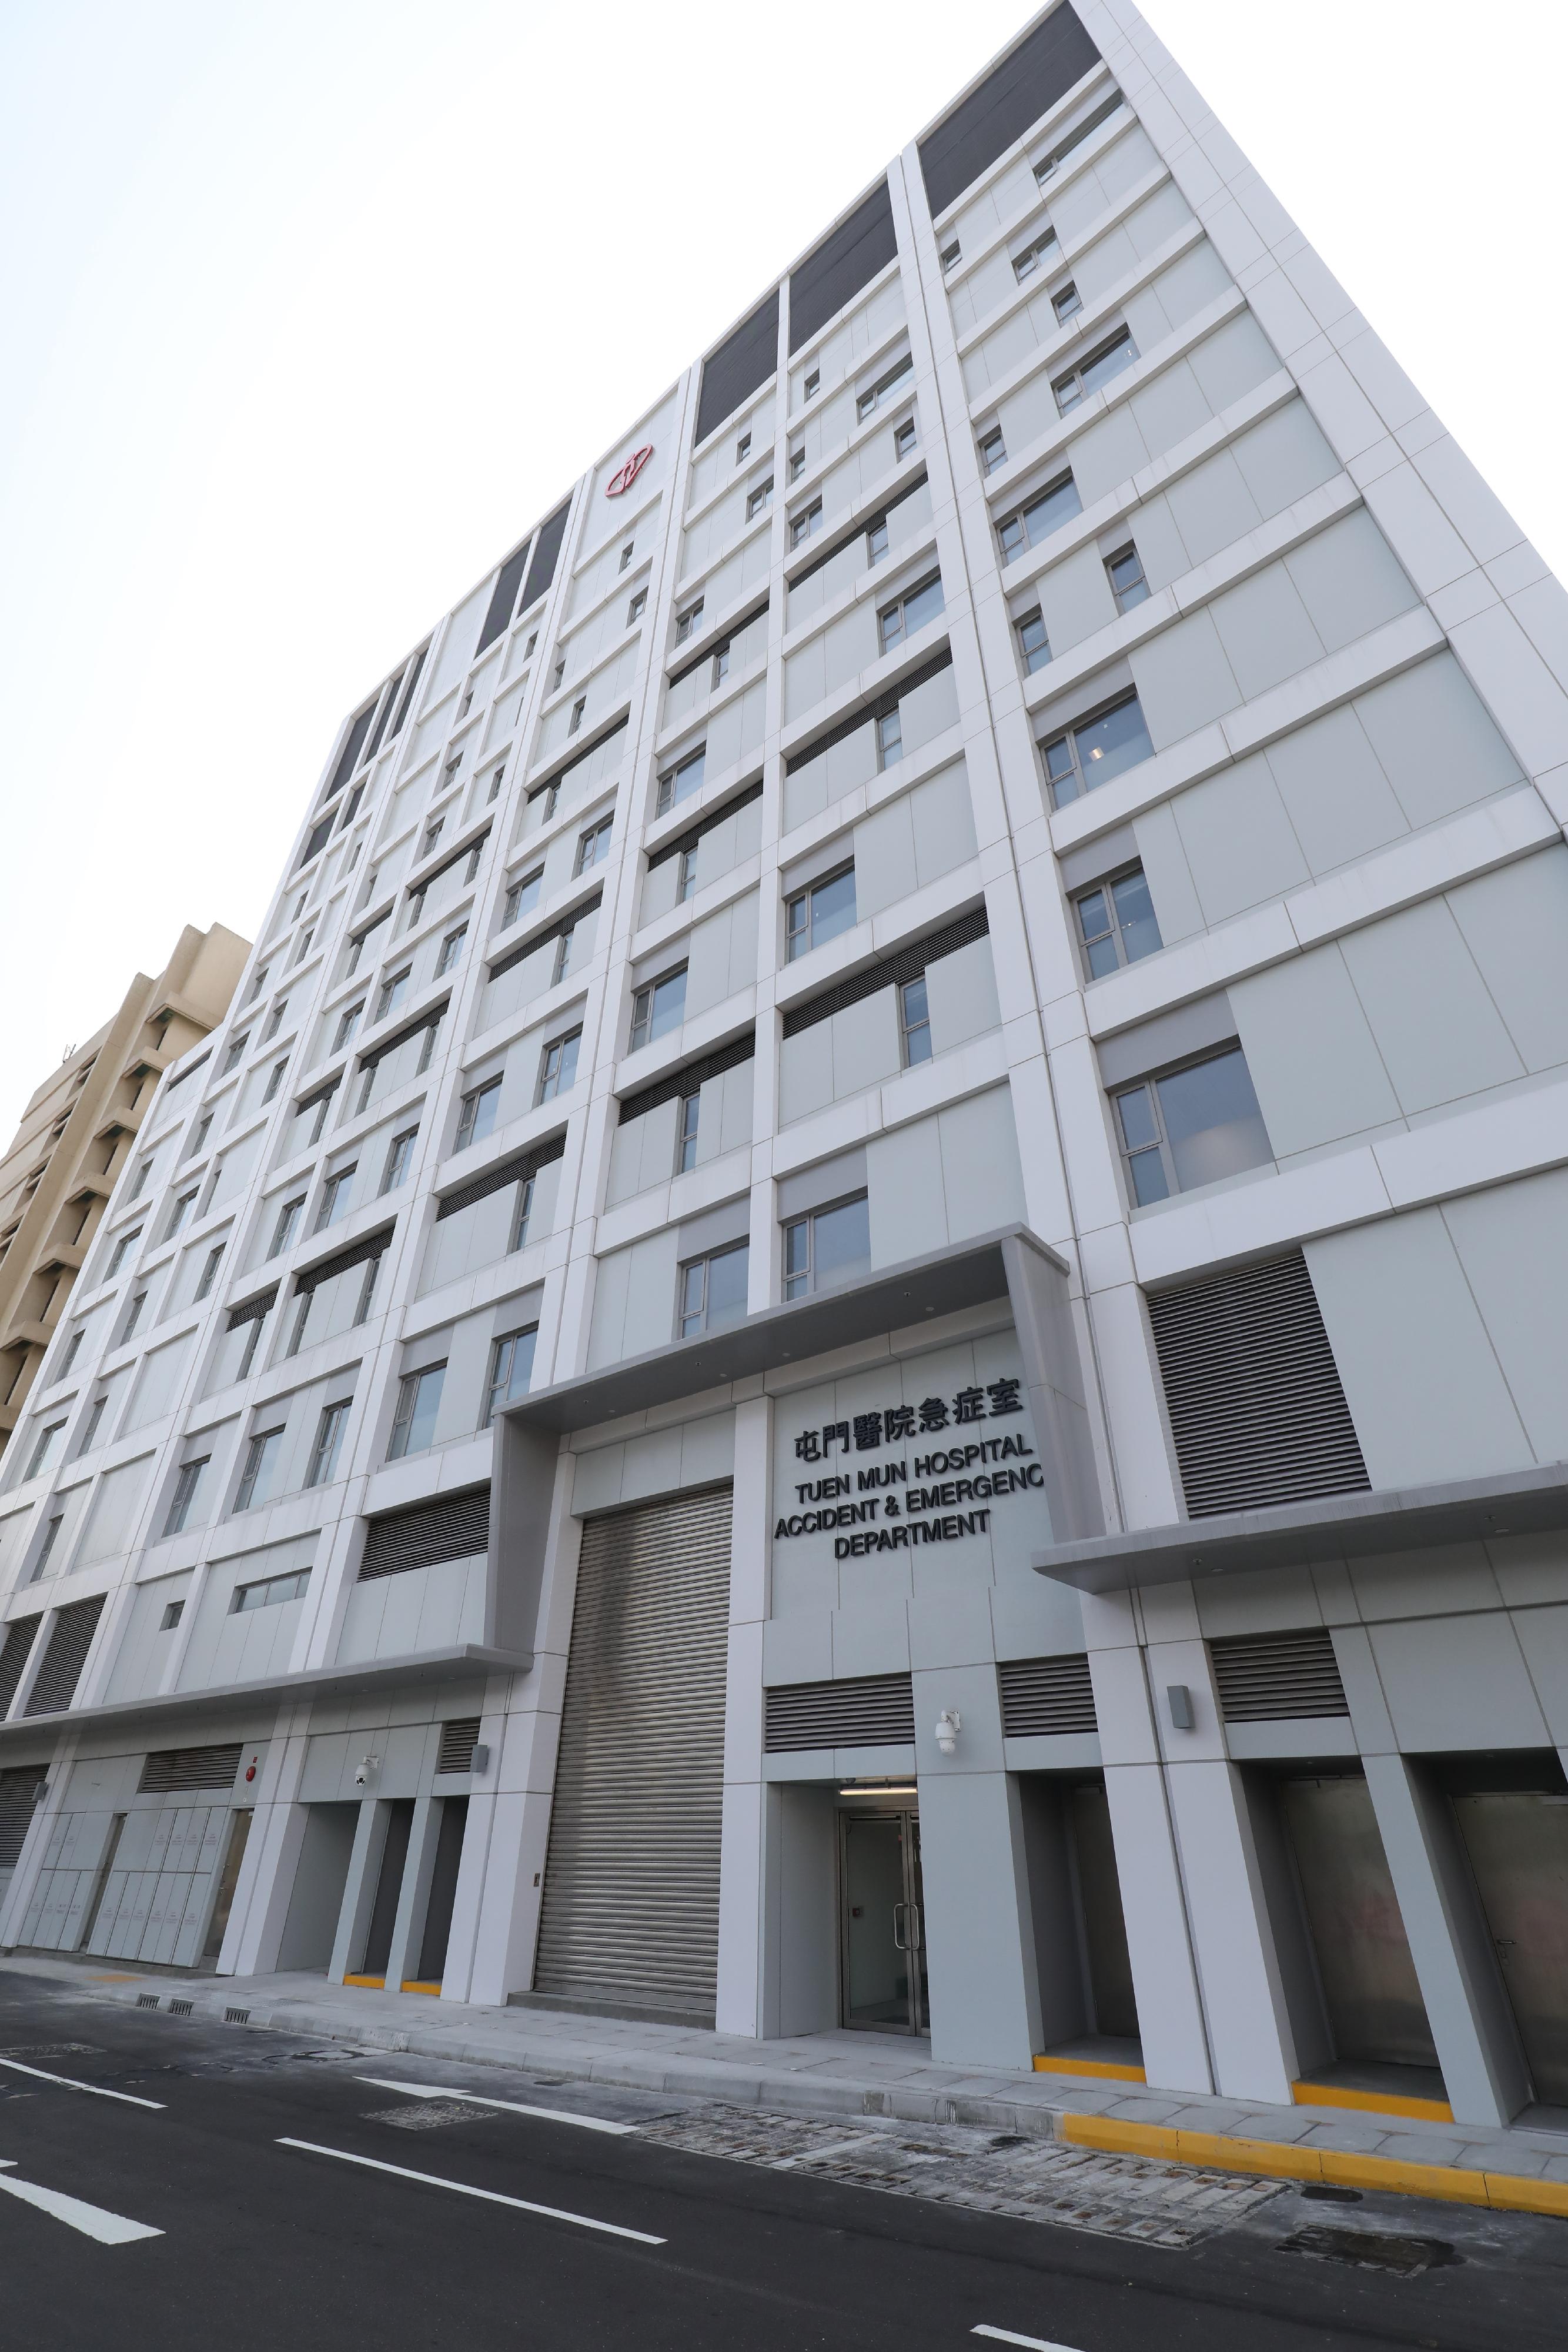 The extension of the Accident and Emergency Department (AED) of Tuen Mun Hospital will officially start service at 8am on June 15. The hospital appeals to the public to access the AED via the new entrance. Photo shows the new main entrance of the AED.

